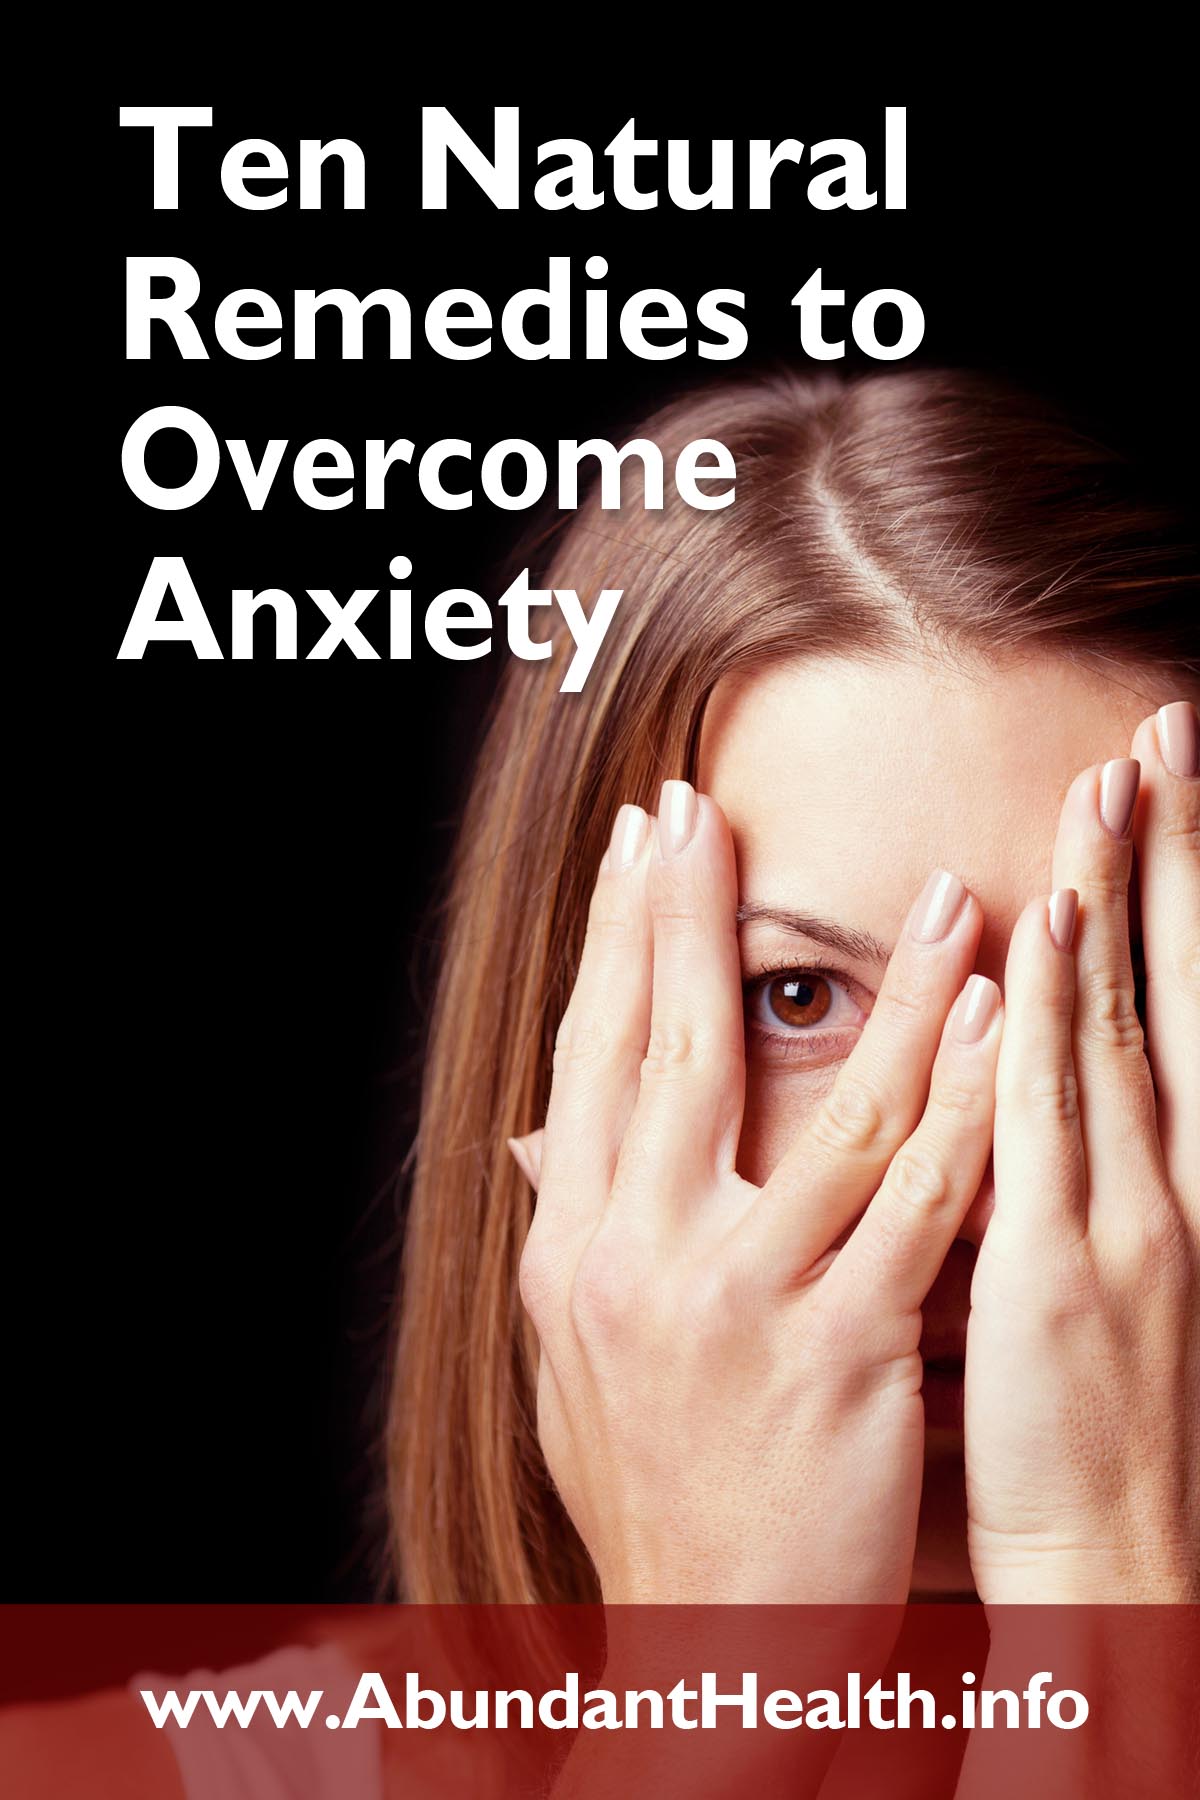 Ten Natural Remedies to Overcome Anxiety